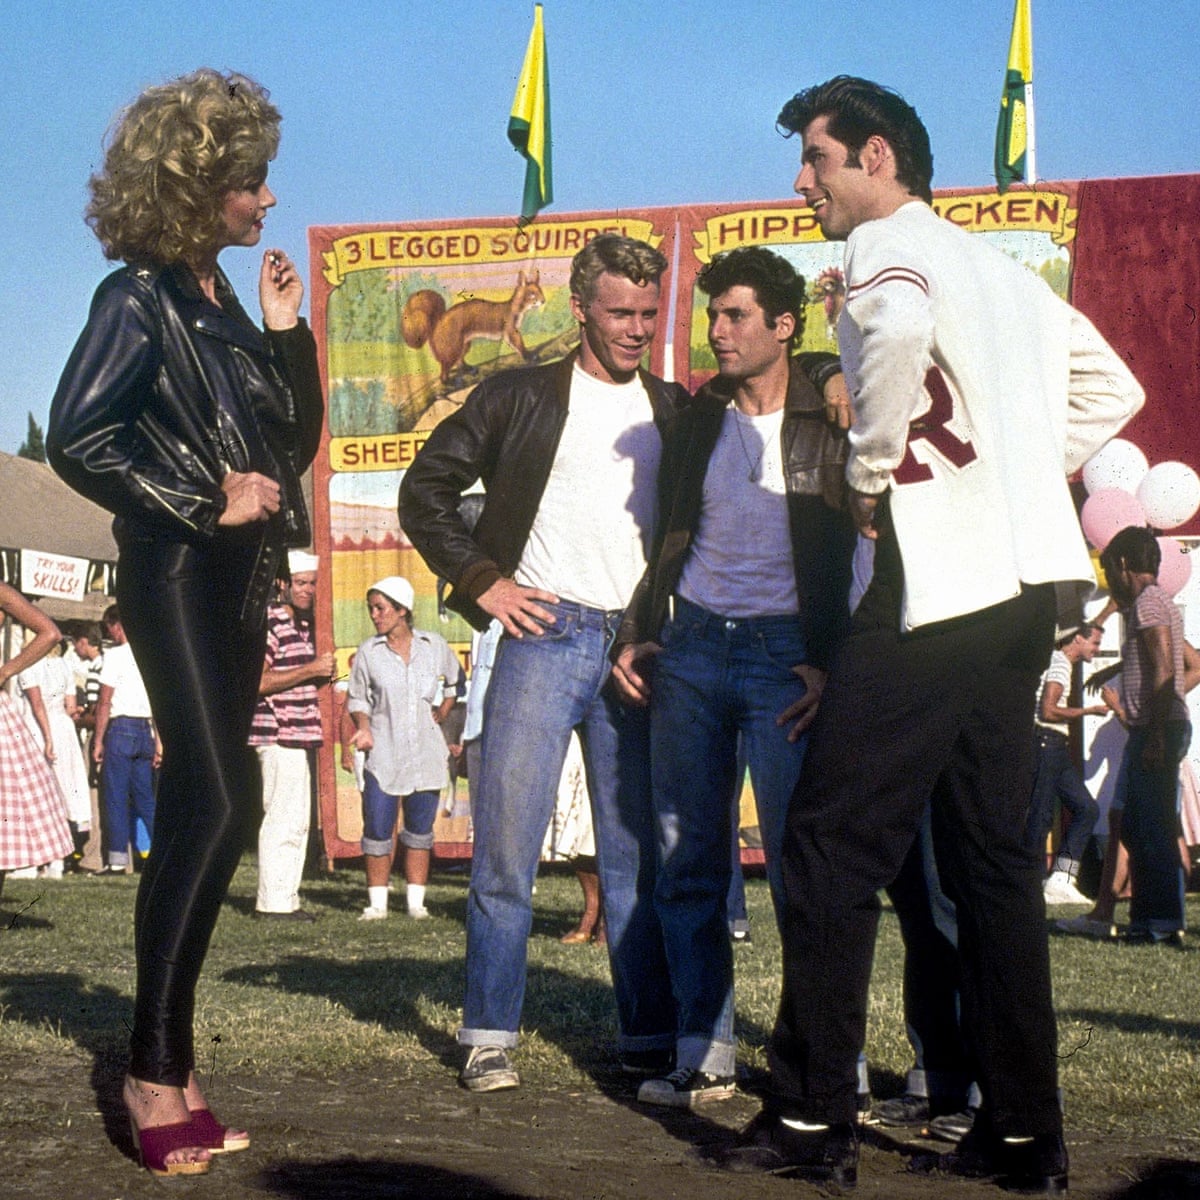 Ahead of its time': how Olivia Newton-John's final Grease outfit became a  cultural phenomenon | Olivia Newton-John | The Guardian